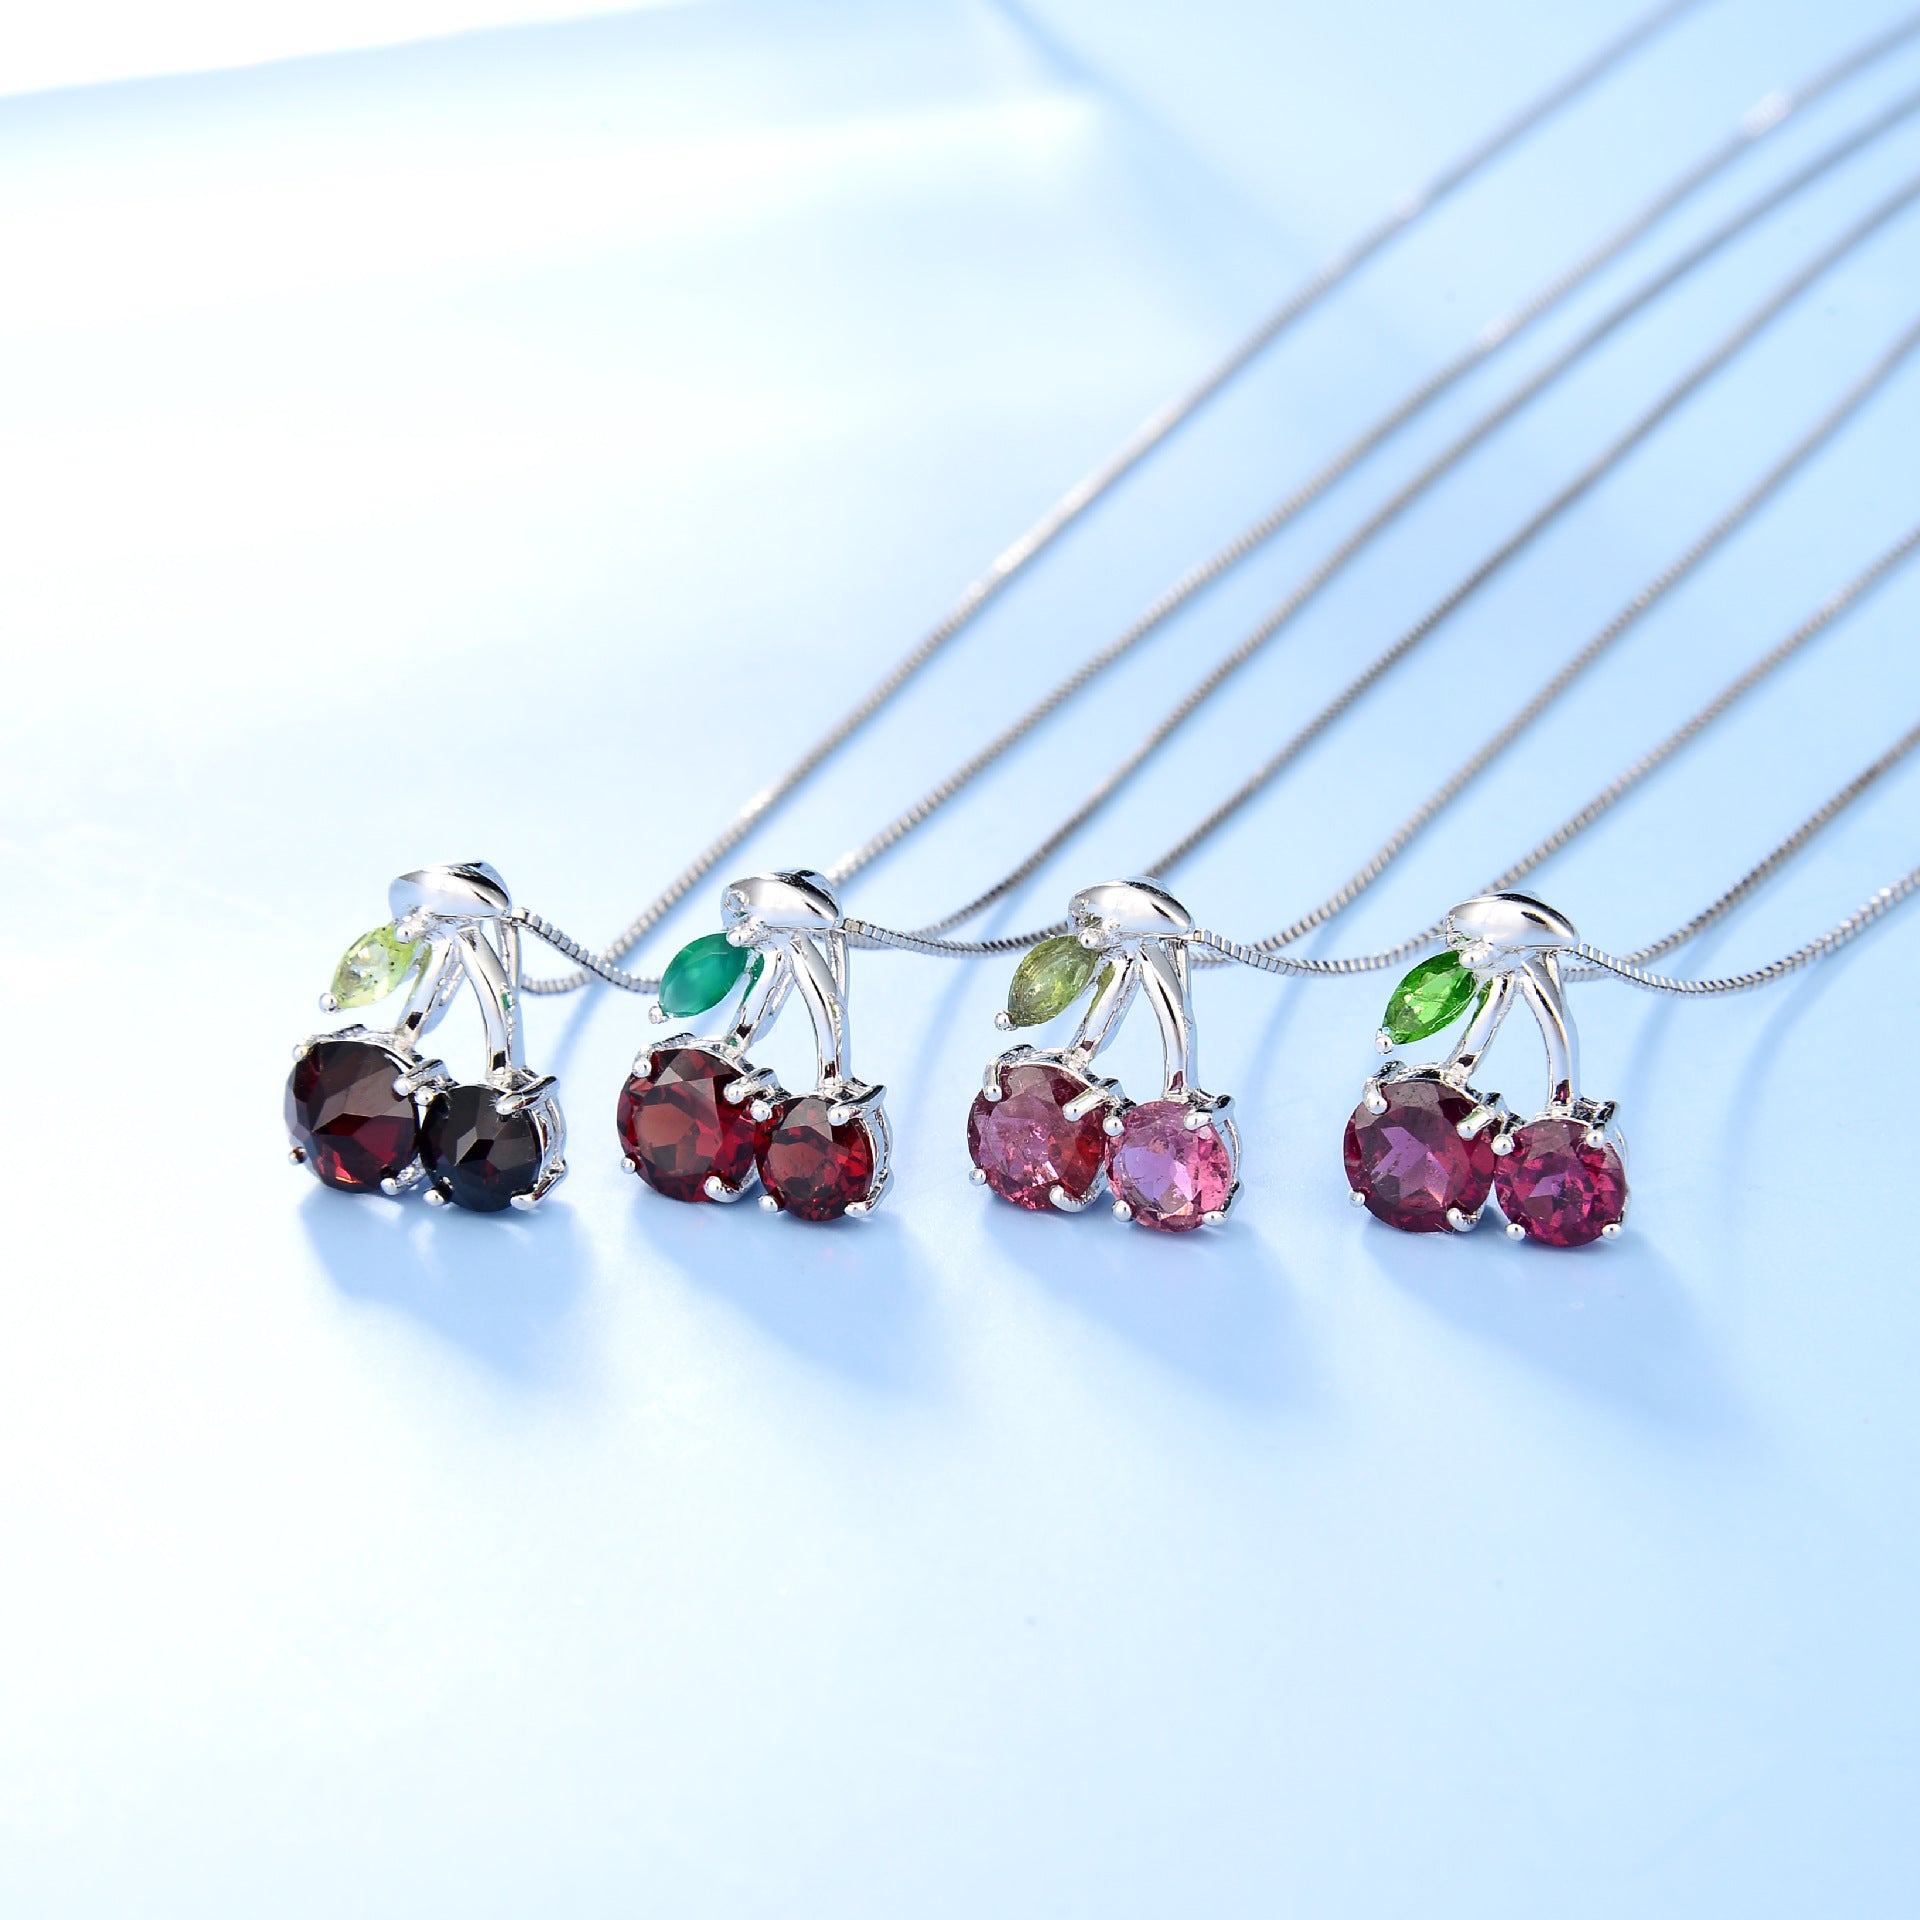 Natural Colourful Gemstone Cherry Pendant Silver Necklace Pendant for Women